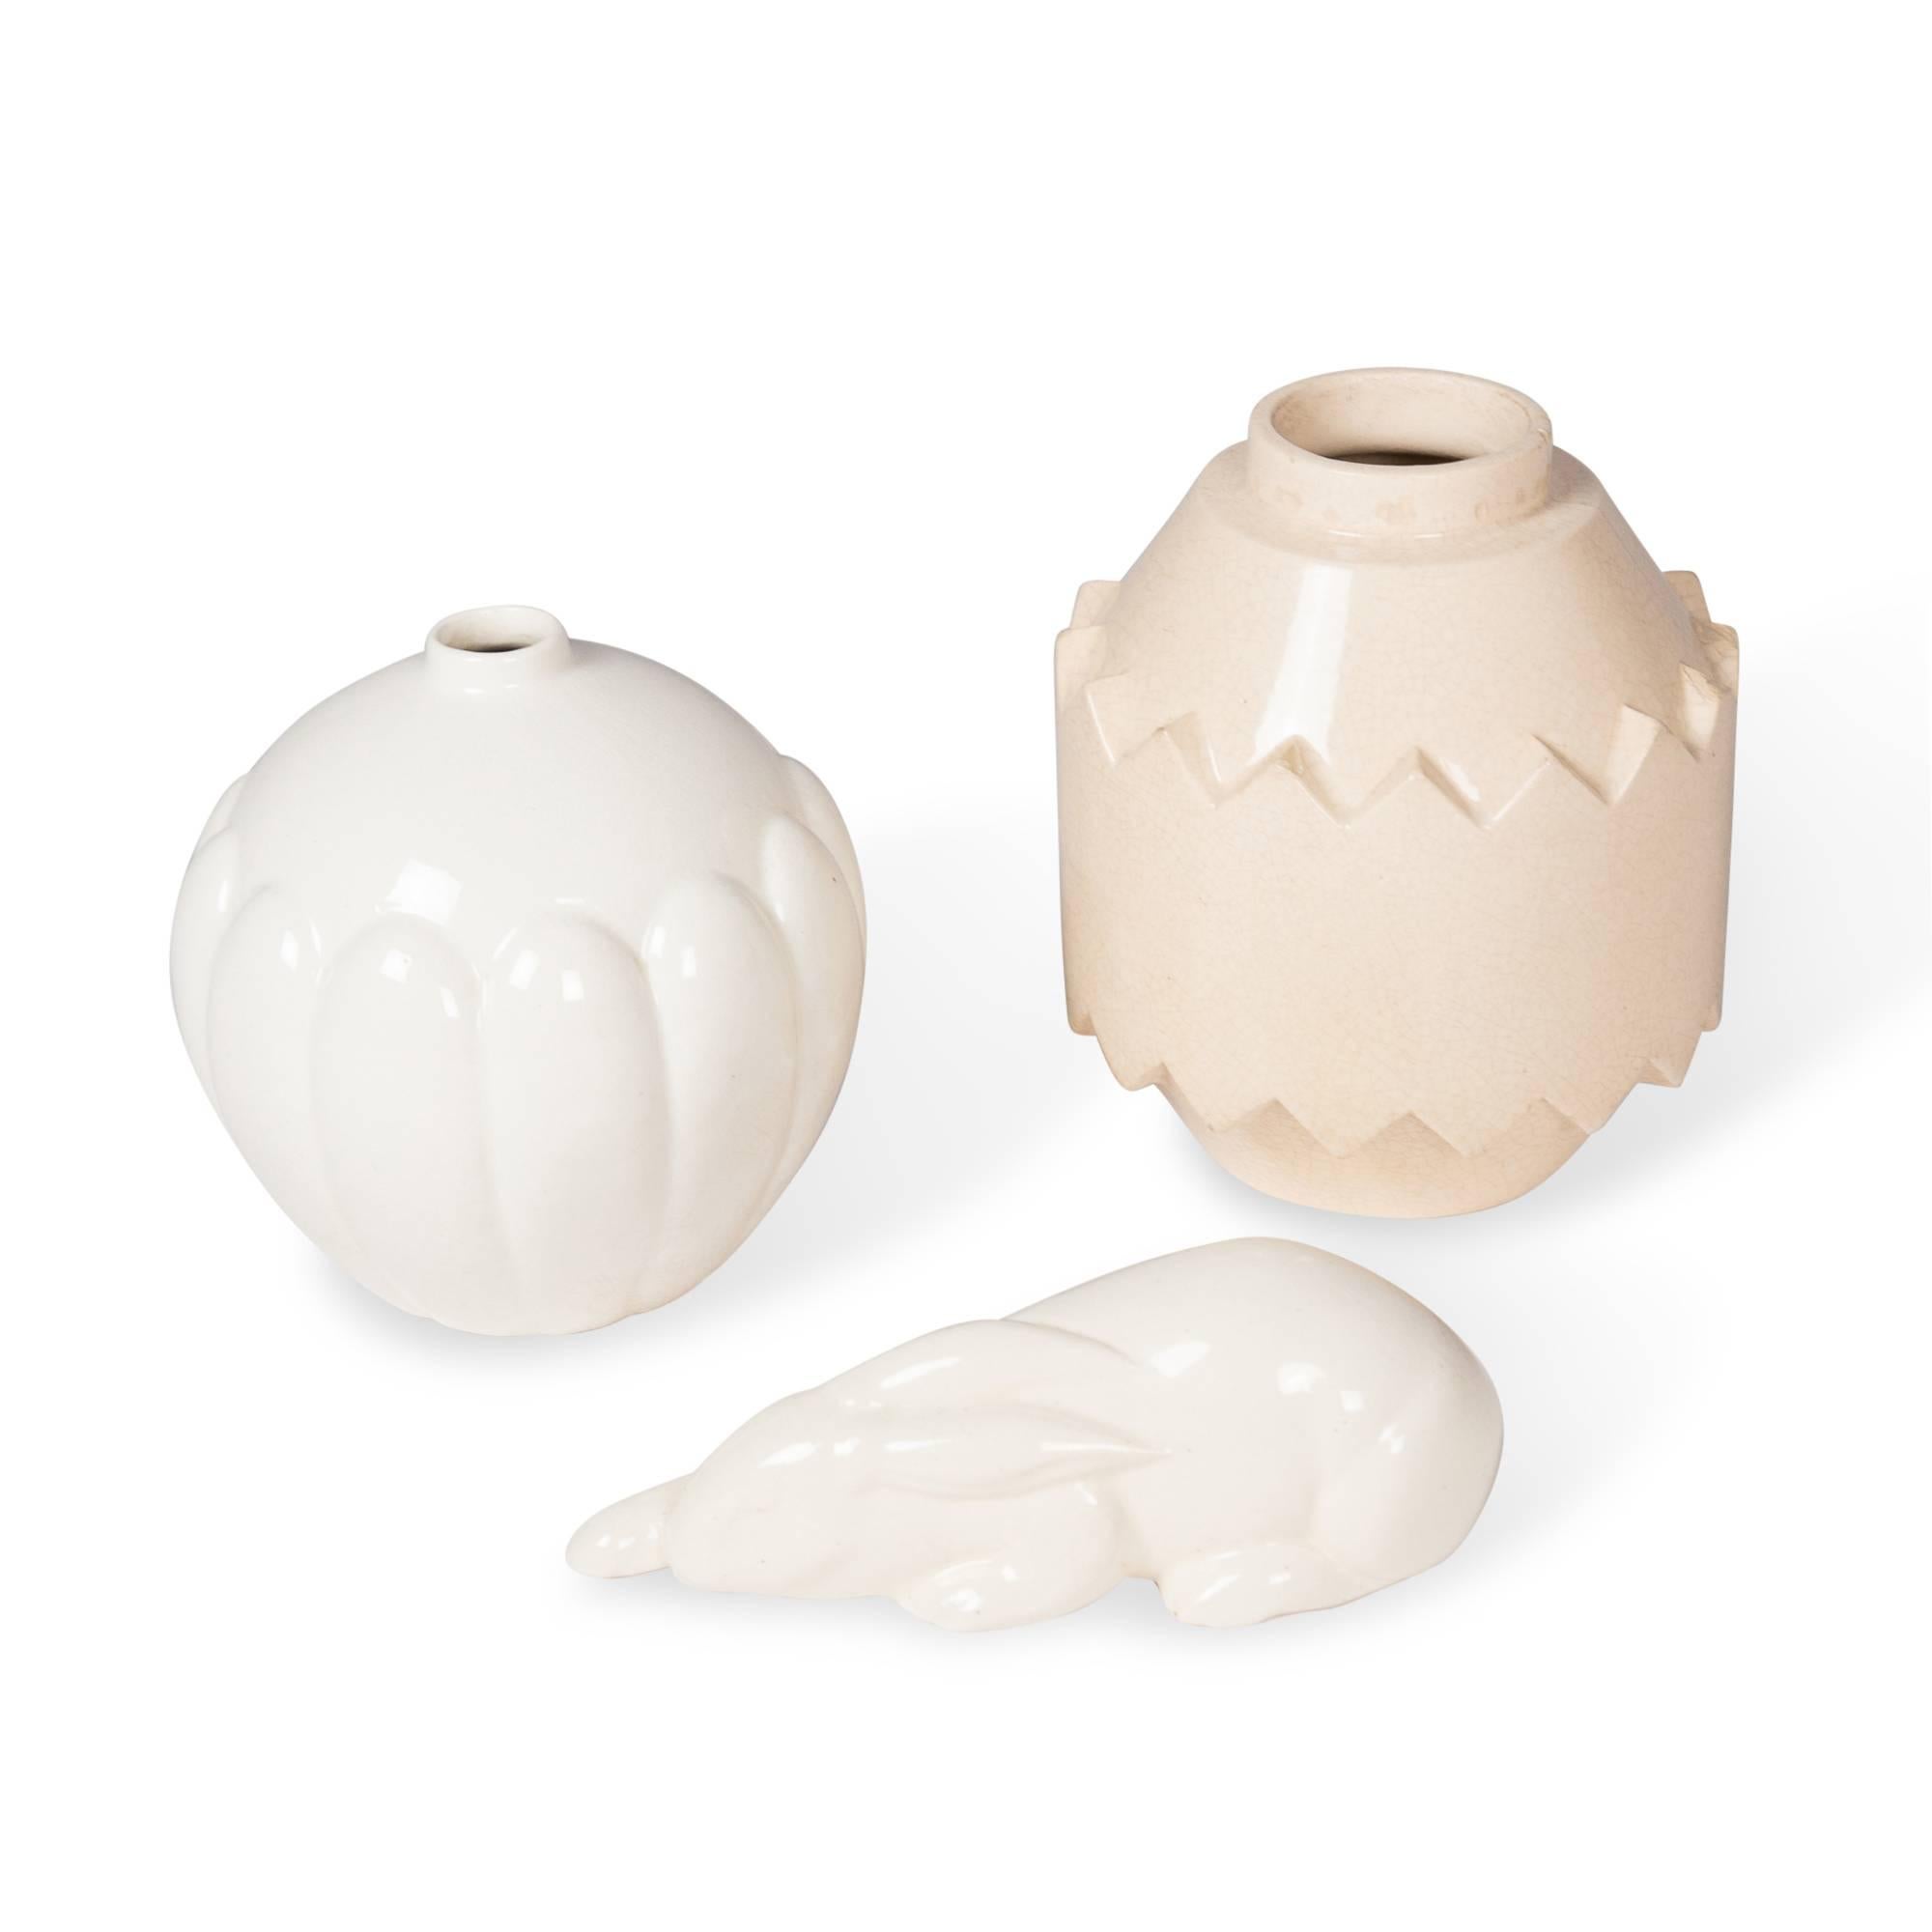 Set of three ceramics.
On left: Off-white crackle glaze ceramic vase, bulbous form with lobed sides, narrow opening, by St. Clement, France 1930s. Measures: Height 7 1/2 in, diameter 7 1/2 in.
On right: Beige crackle glaze ceramic vase, of